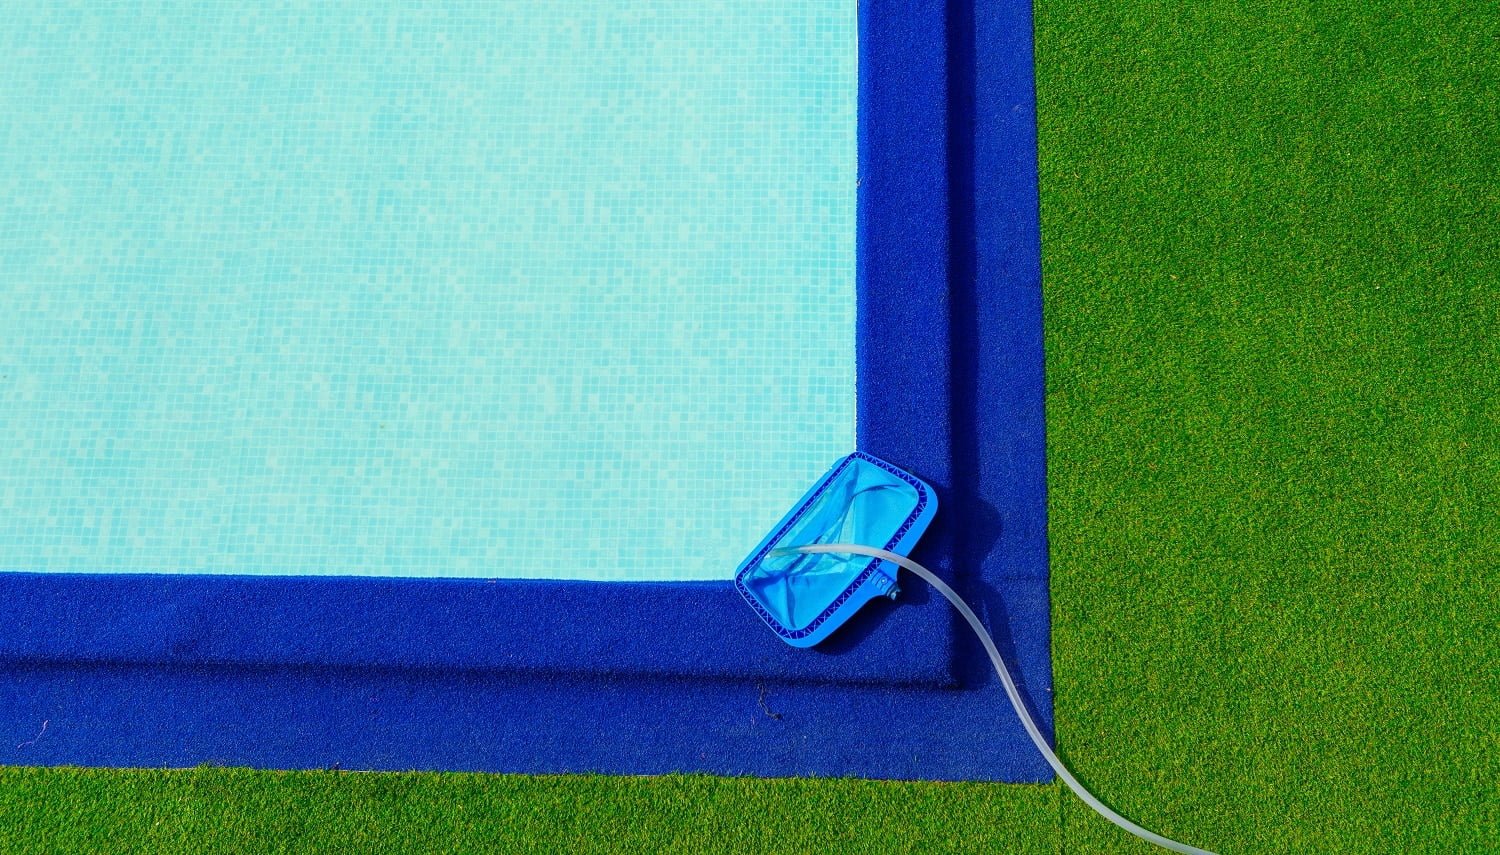 Top view cleaning net at on the edge of the pool is green and blue artificial grass.